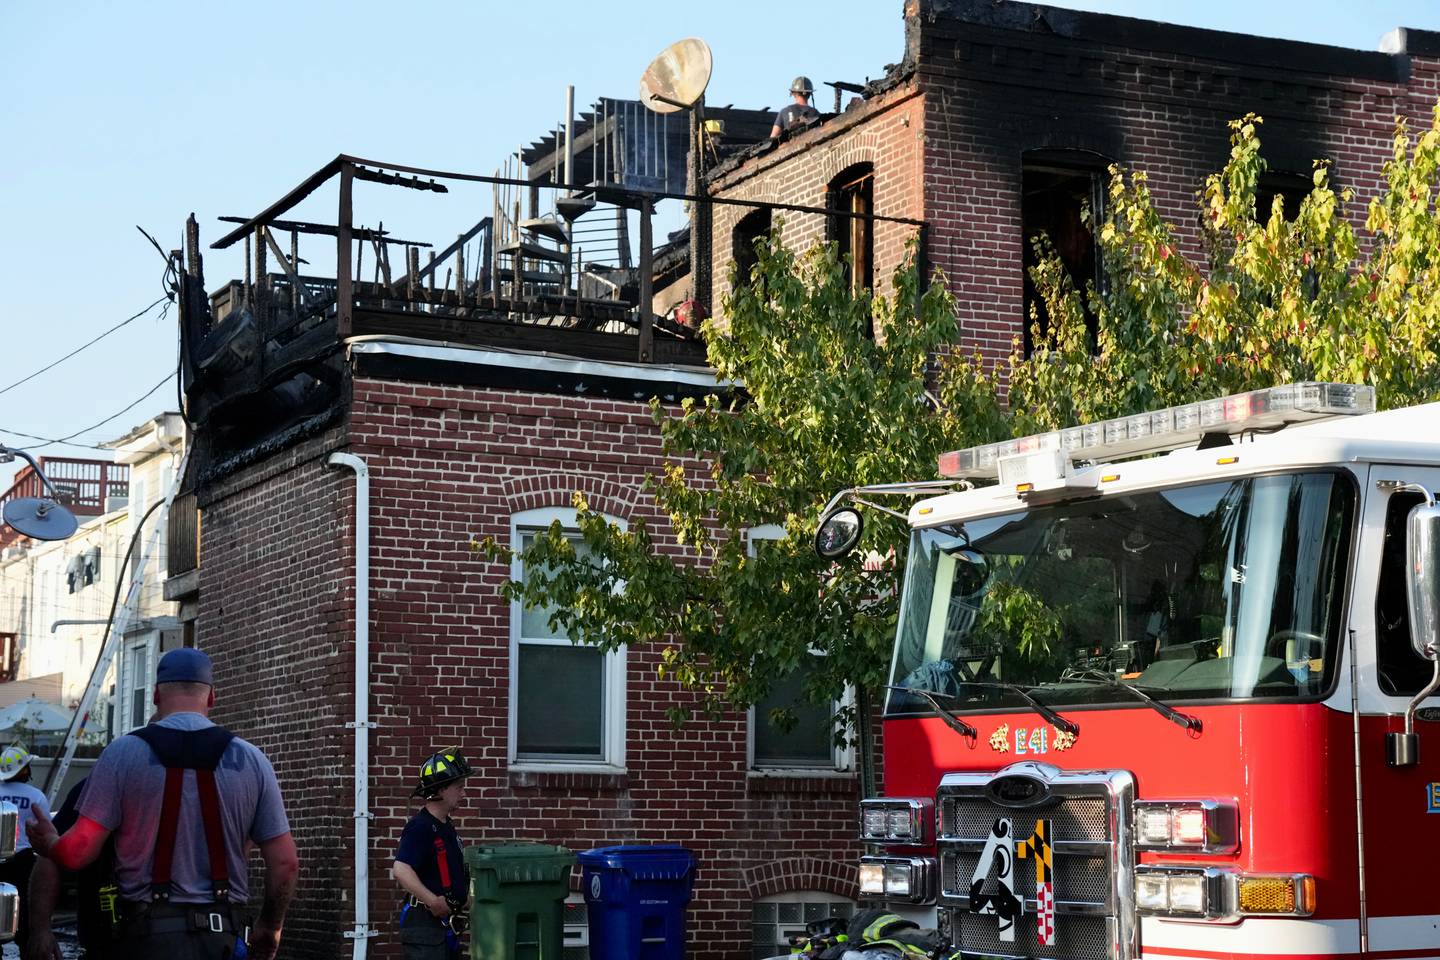 A firefighter stands on the roof of a burned rowhome. A burned deck and staircase are visible. In the foreground is a Baltimore Fire Department truck.